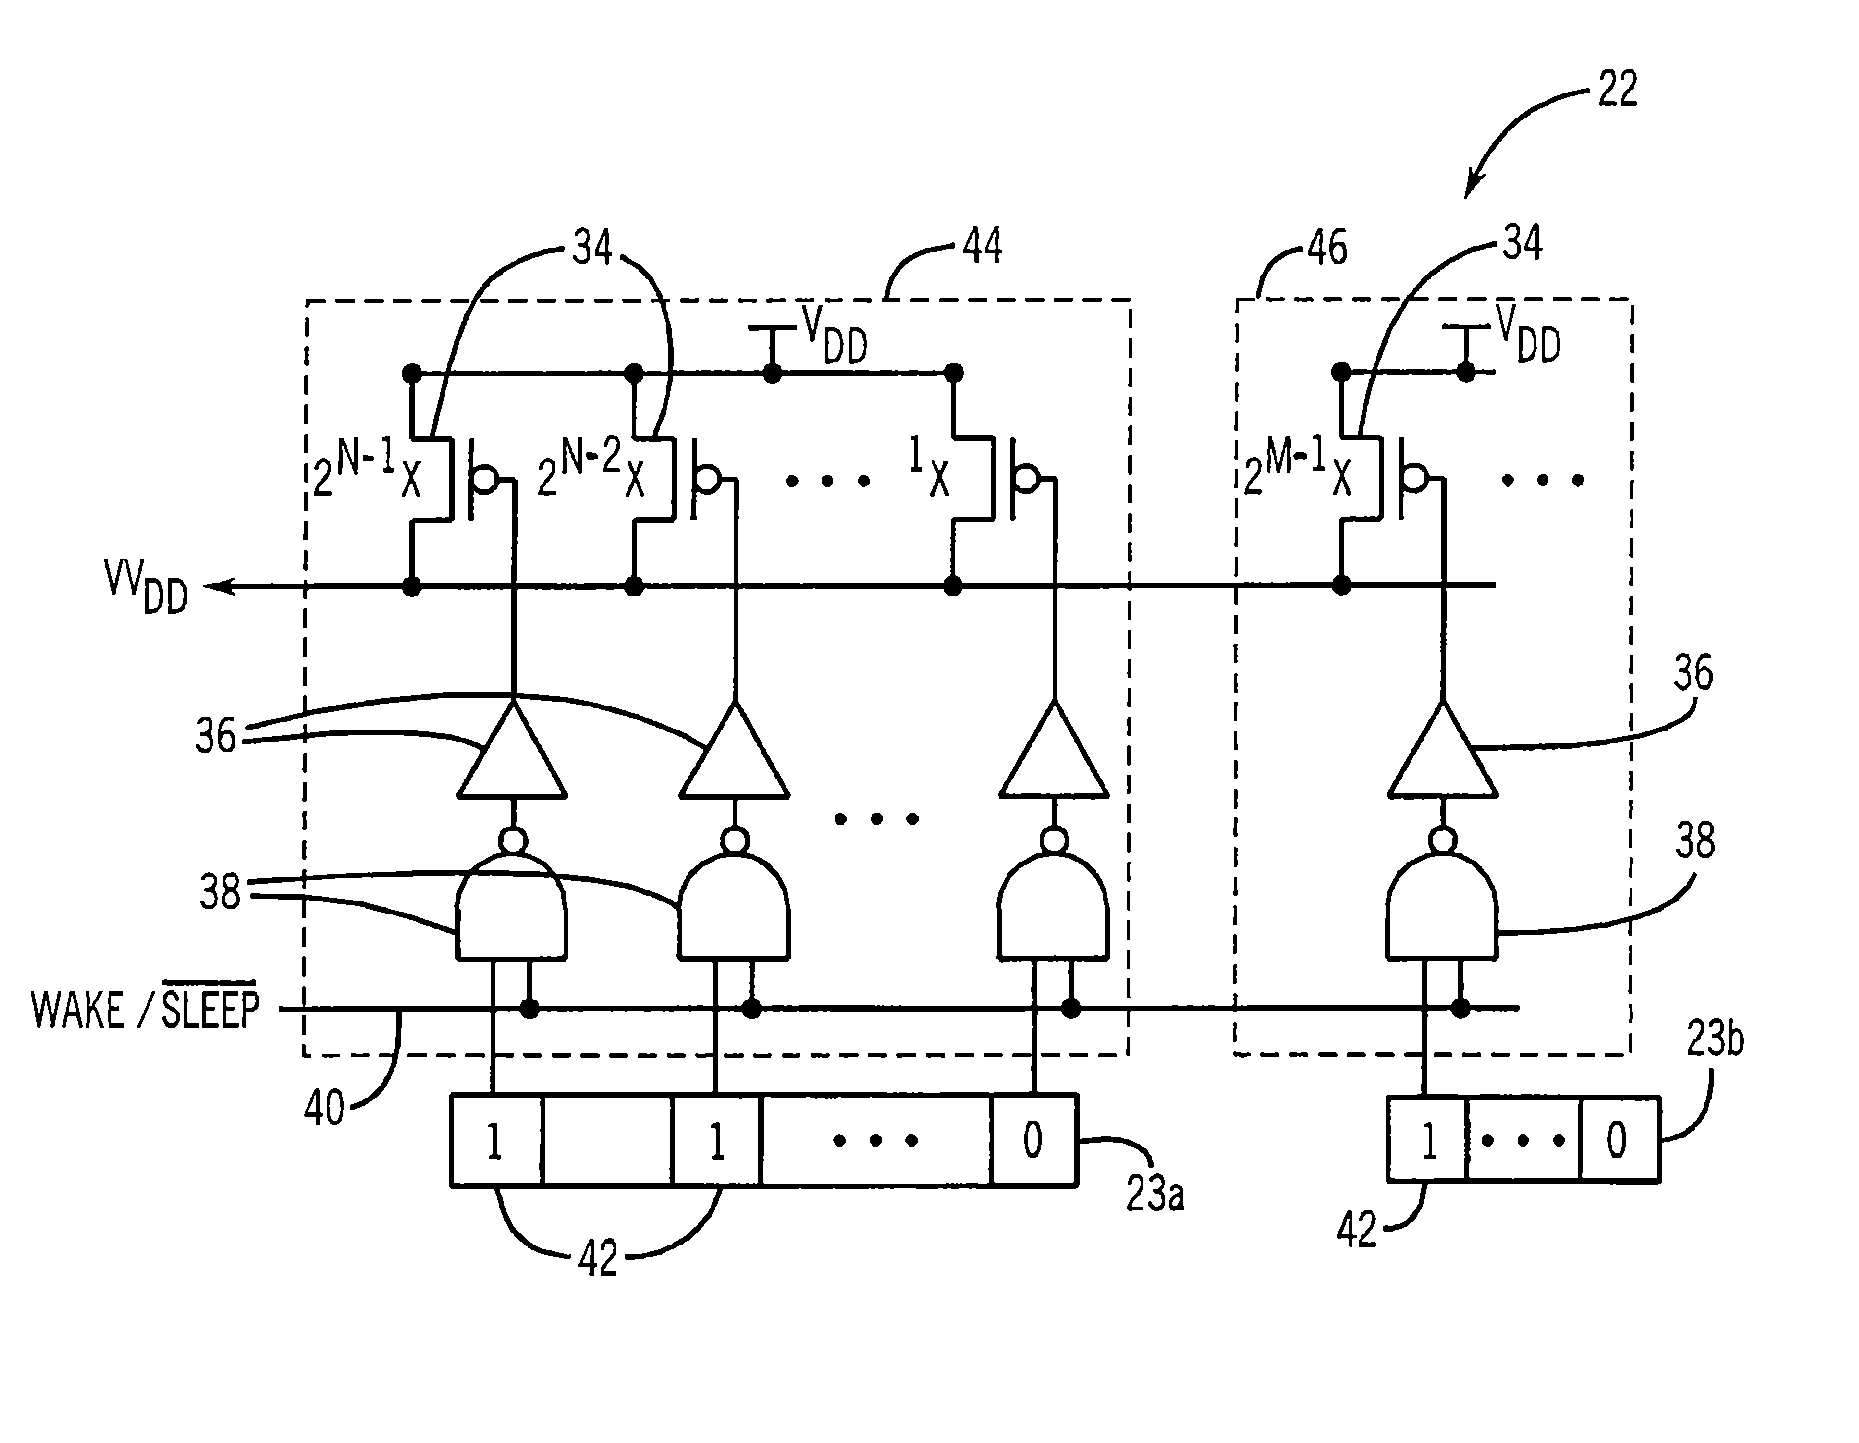 Leakage power management using programmable power gating transistors and on-chip aging and temperature tracking circuit